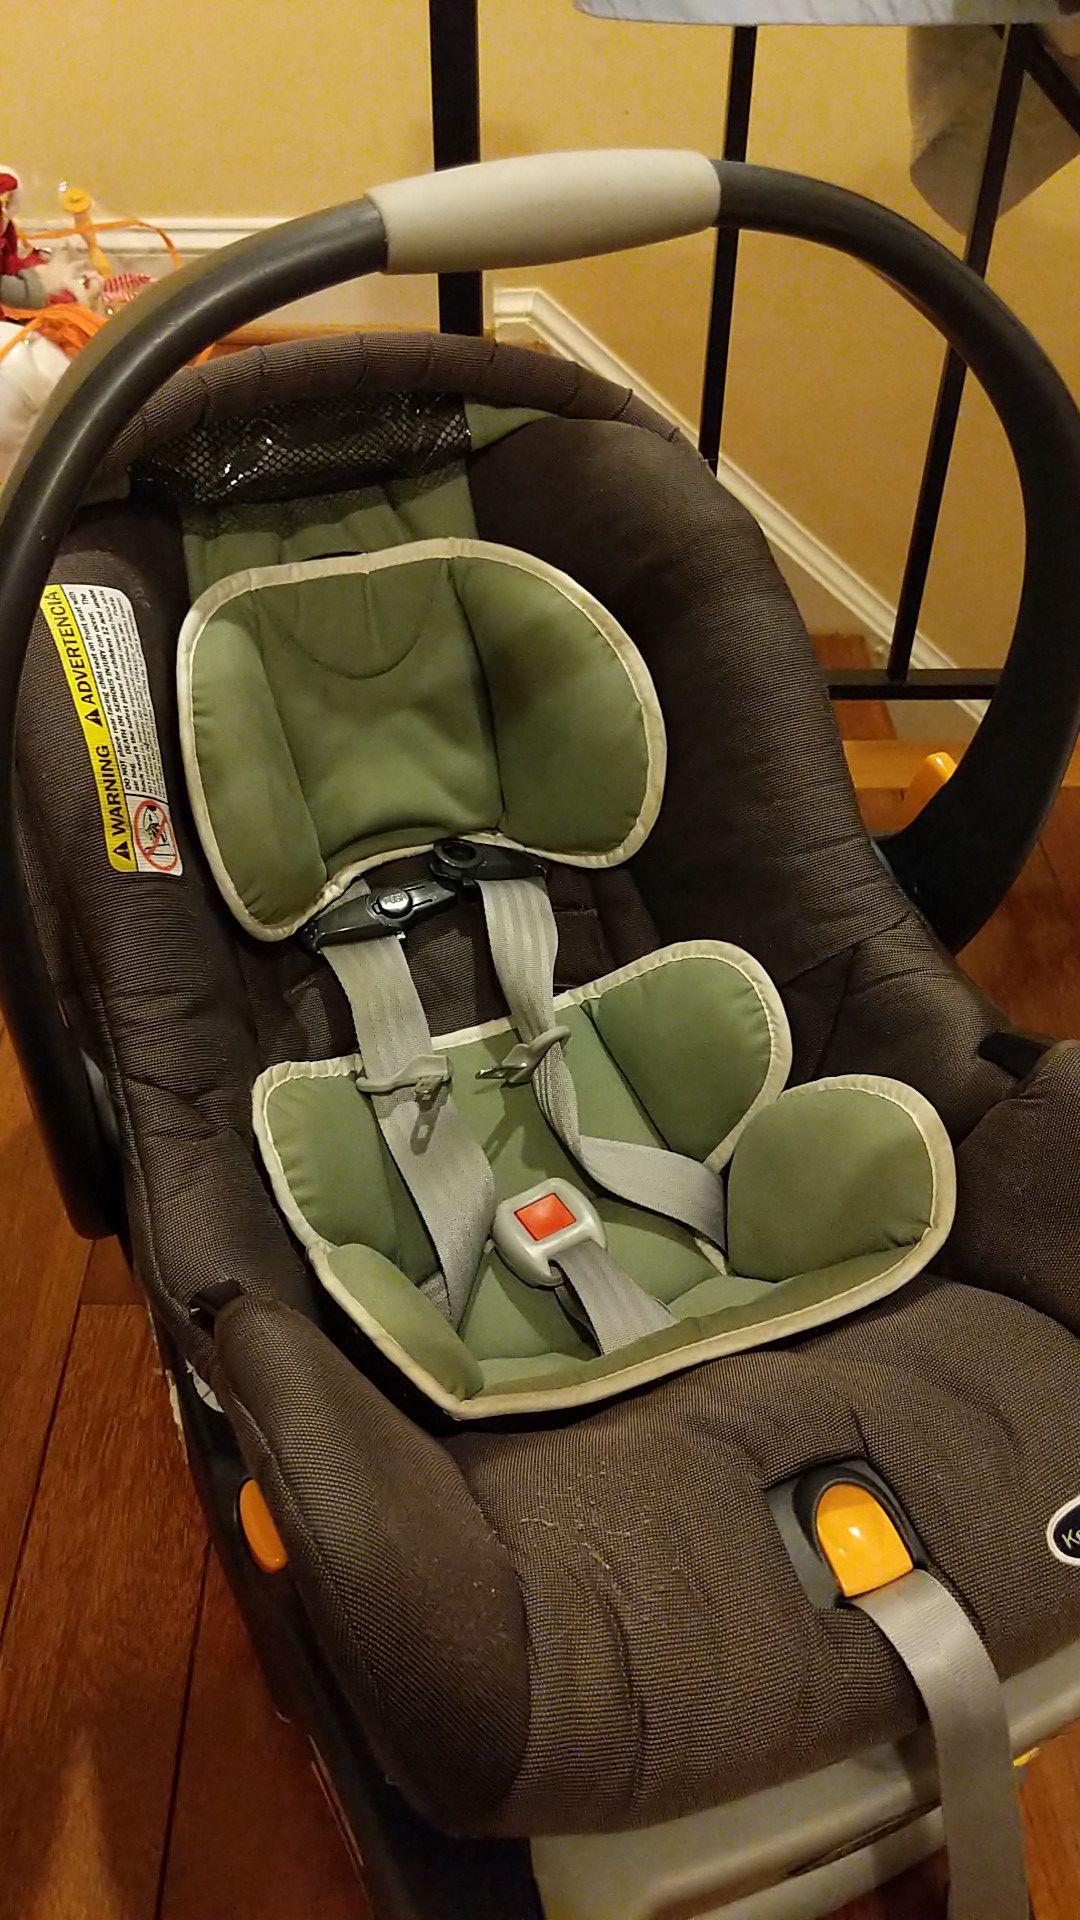 Chicco infant car seat KeyFit 30